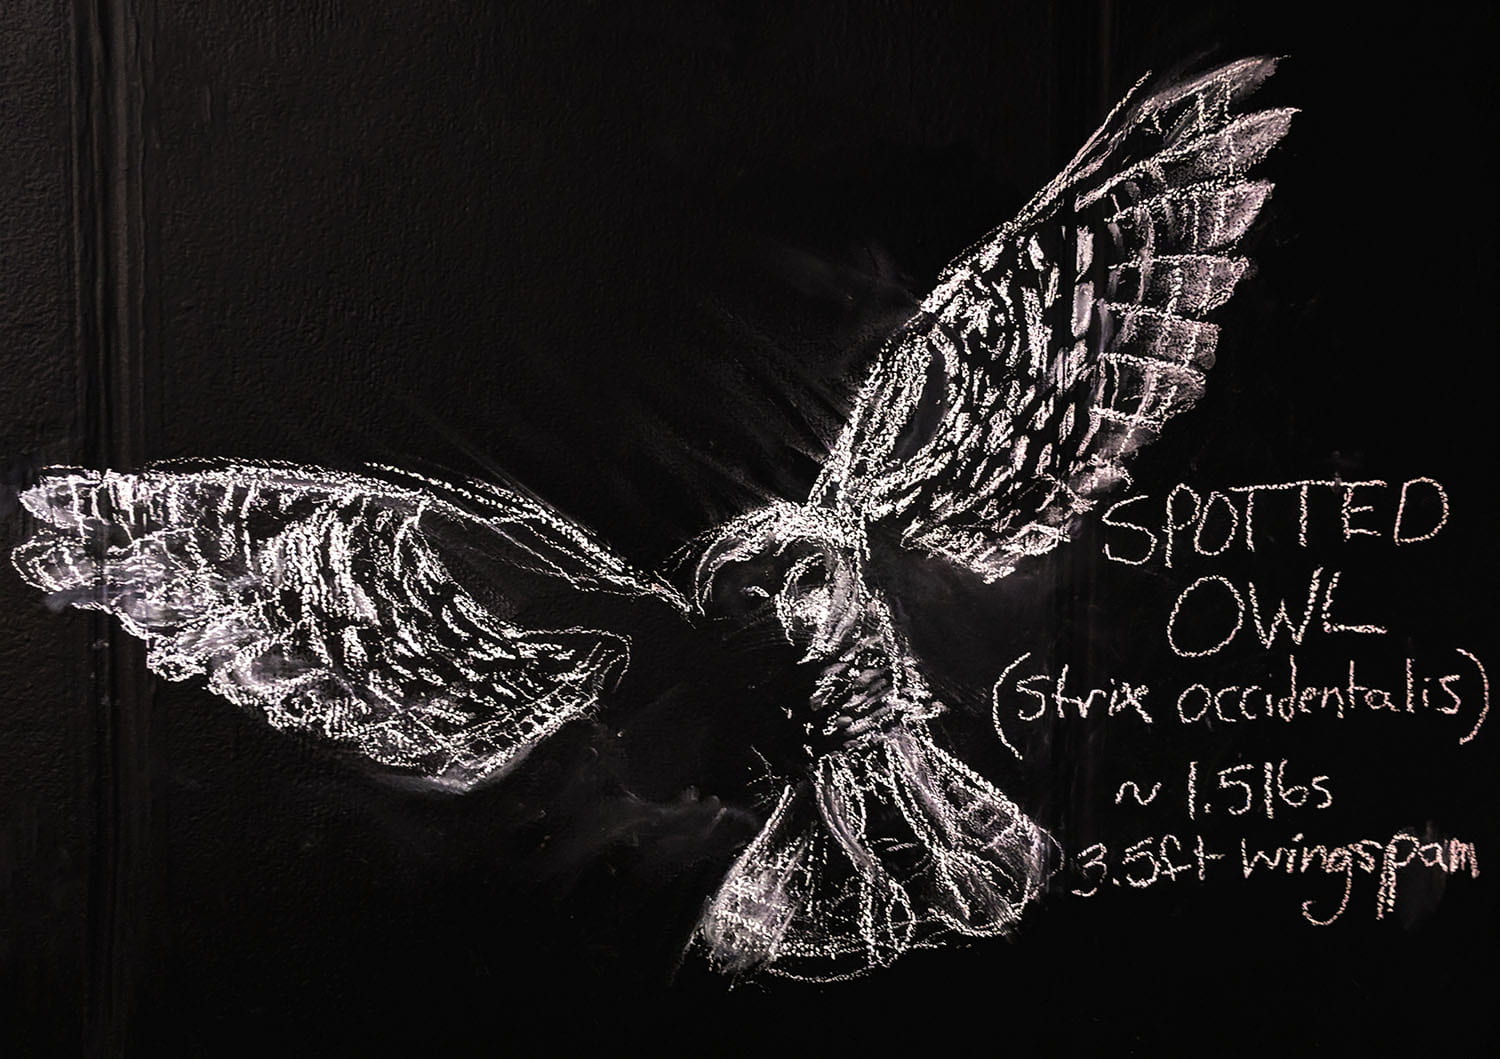 labeled drawing of a spotted owl (Strix Occidentalis) ~ 1.5lbs, 3.5ft wingspan